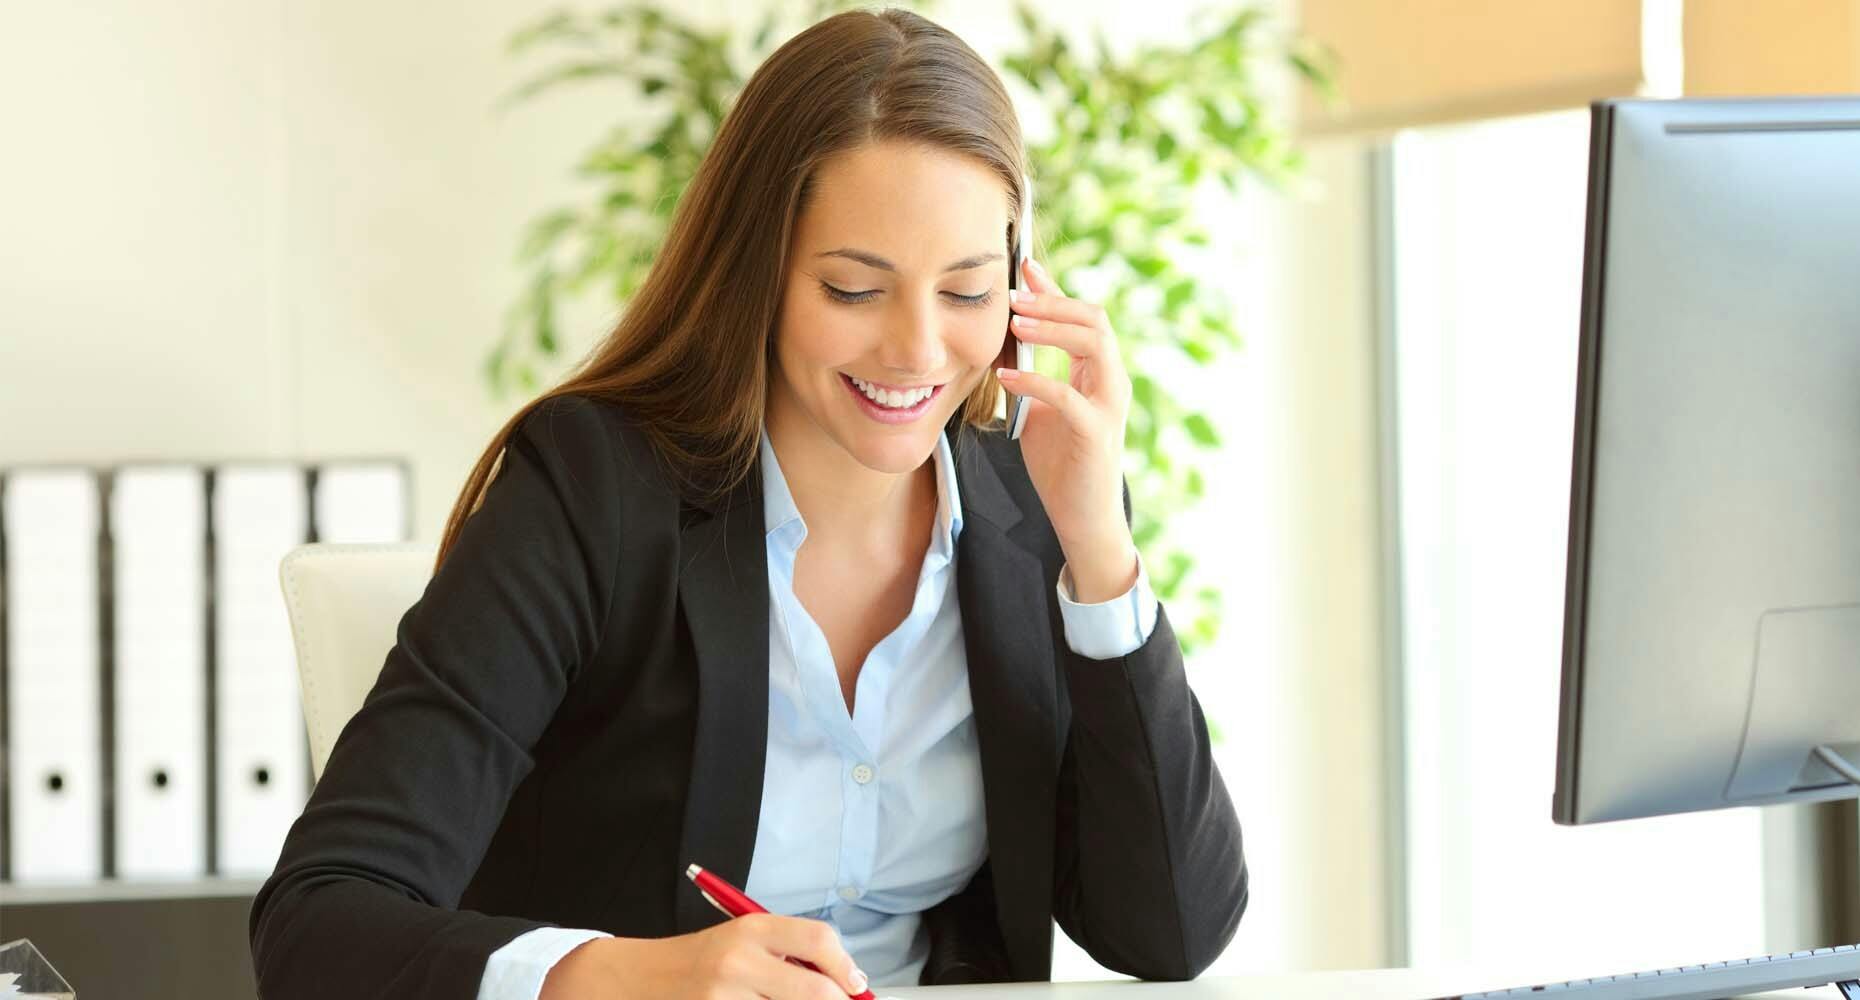 Sales woman taking notes while on a call